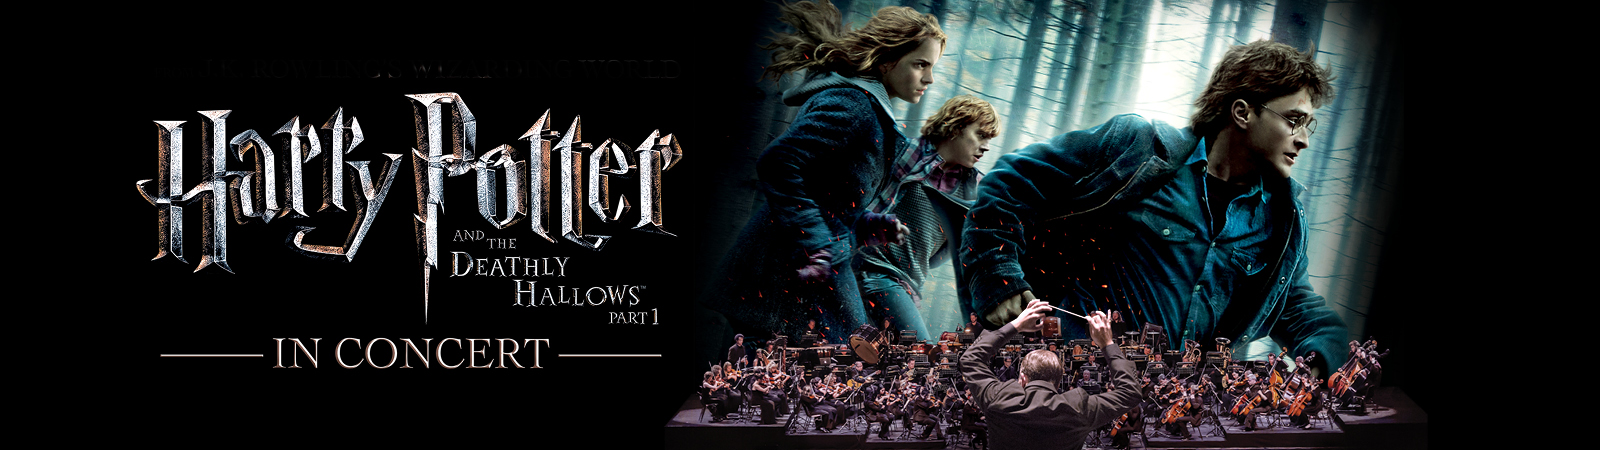 watch harry potter deathly hallows part 1 online